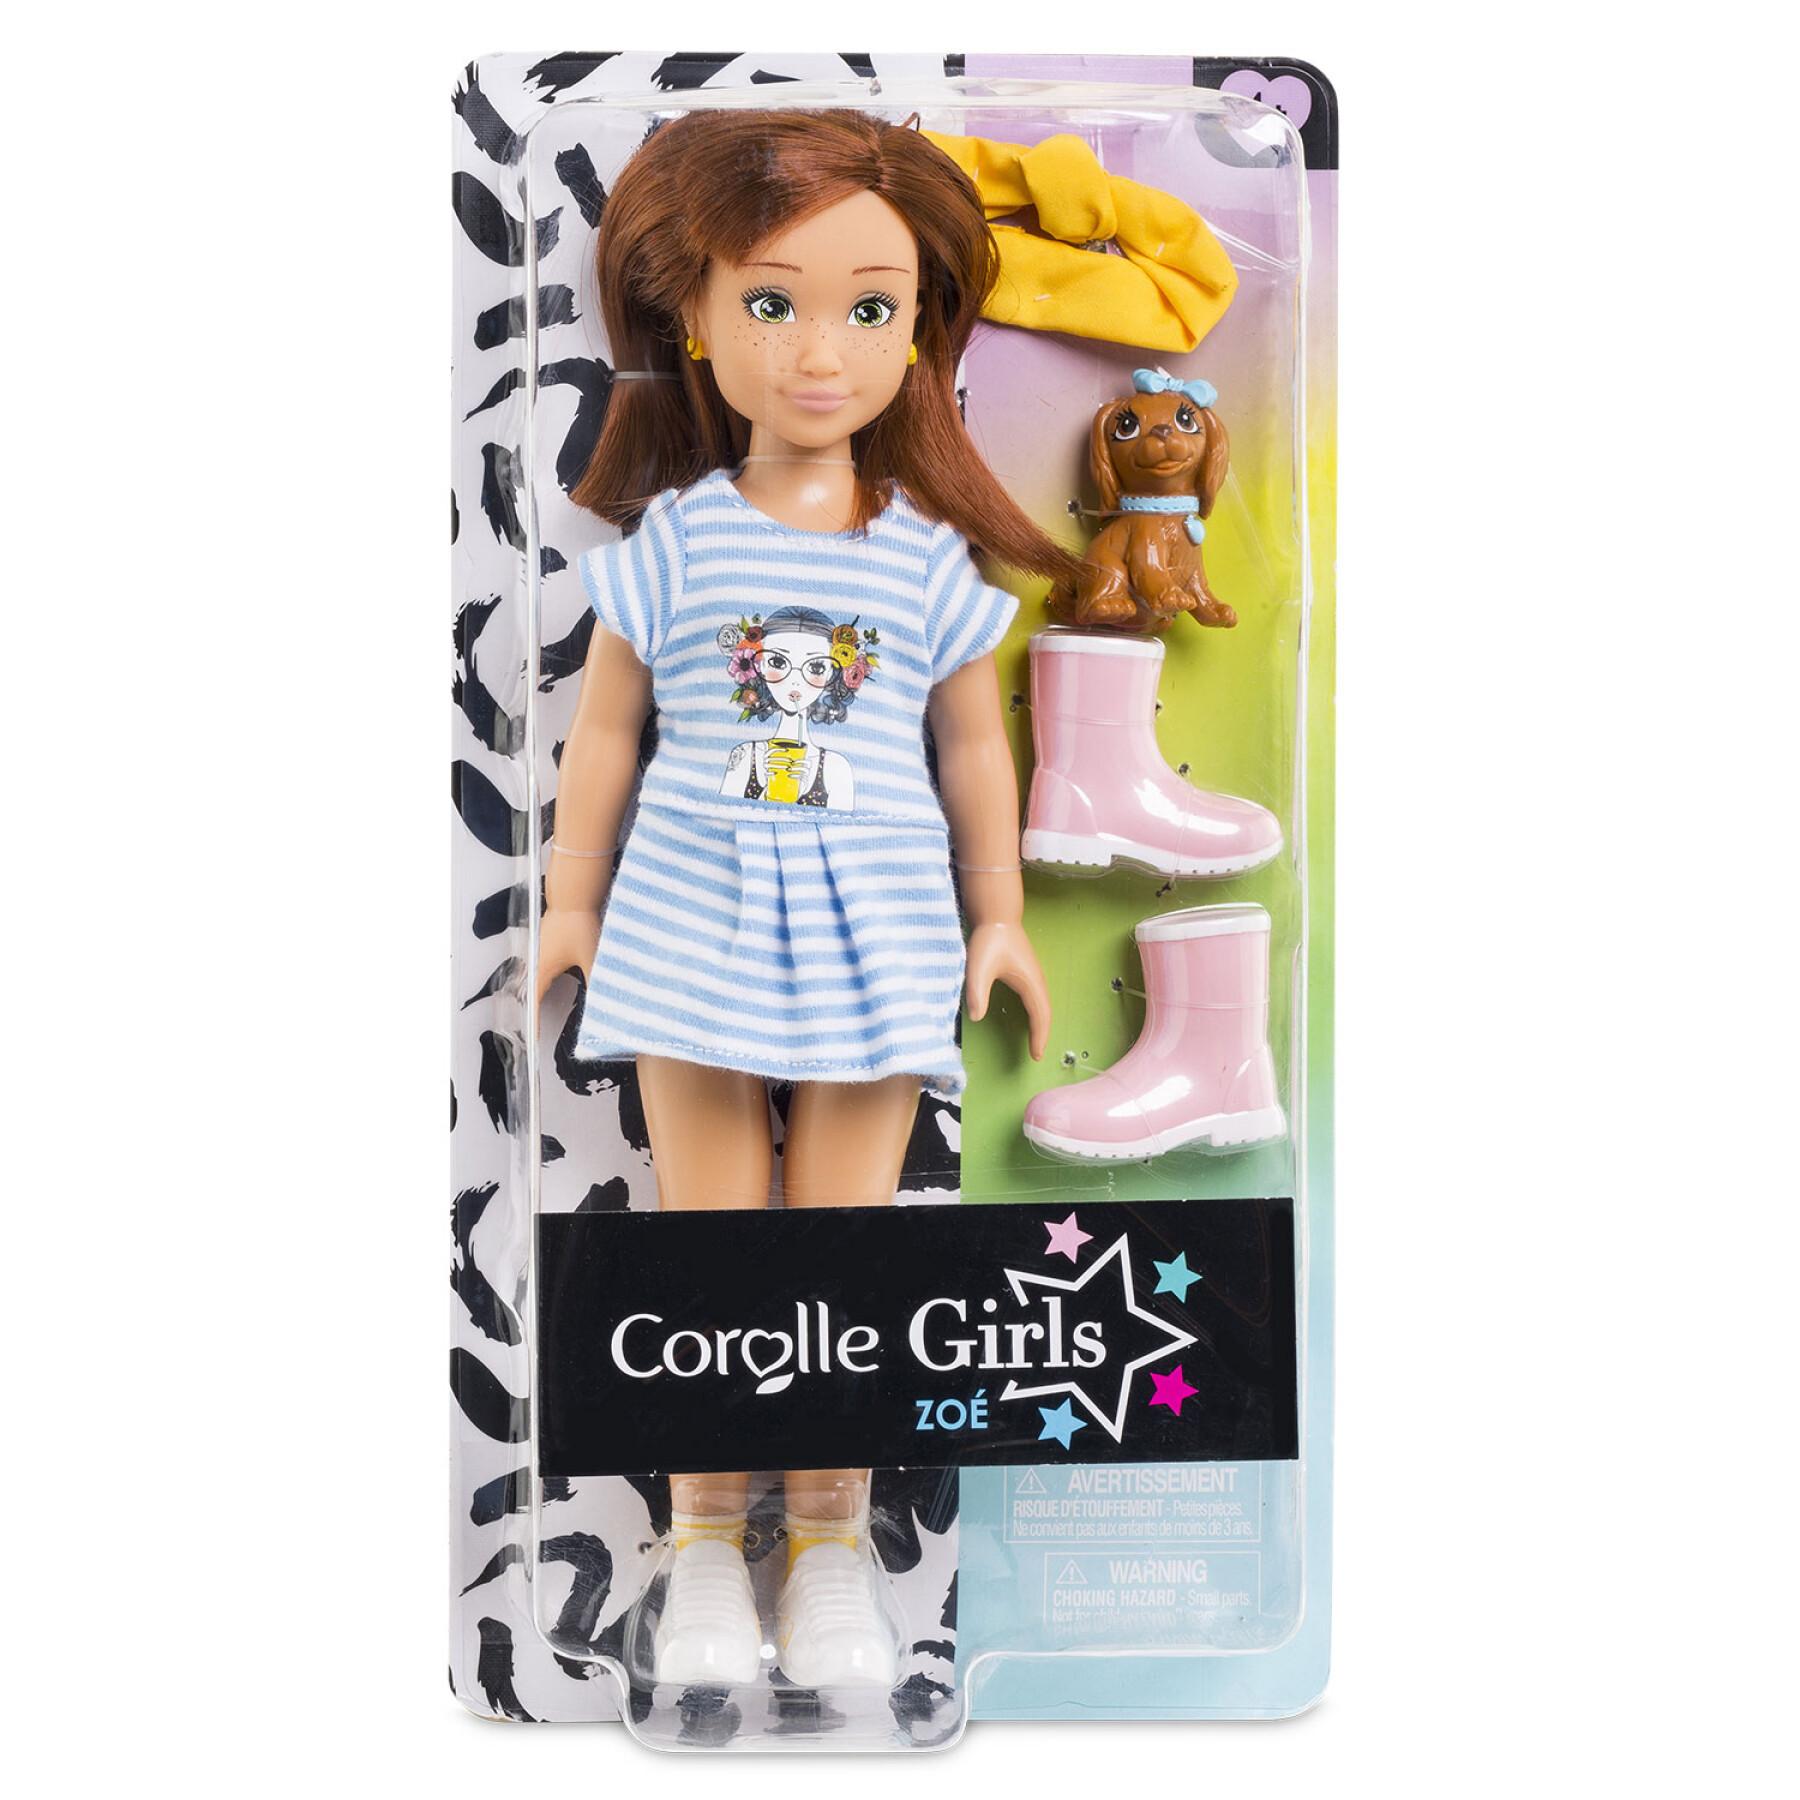 Zoe nature and adventure doll Corolle